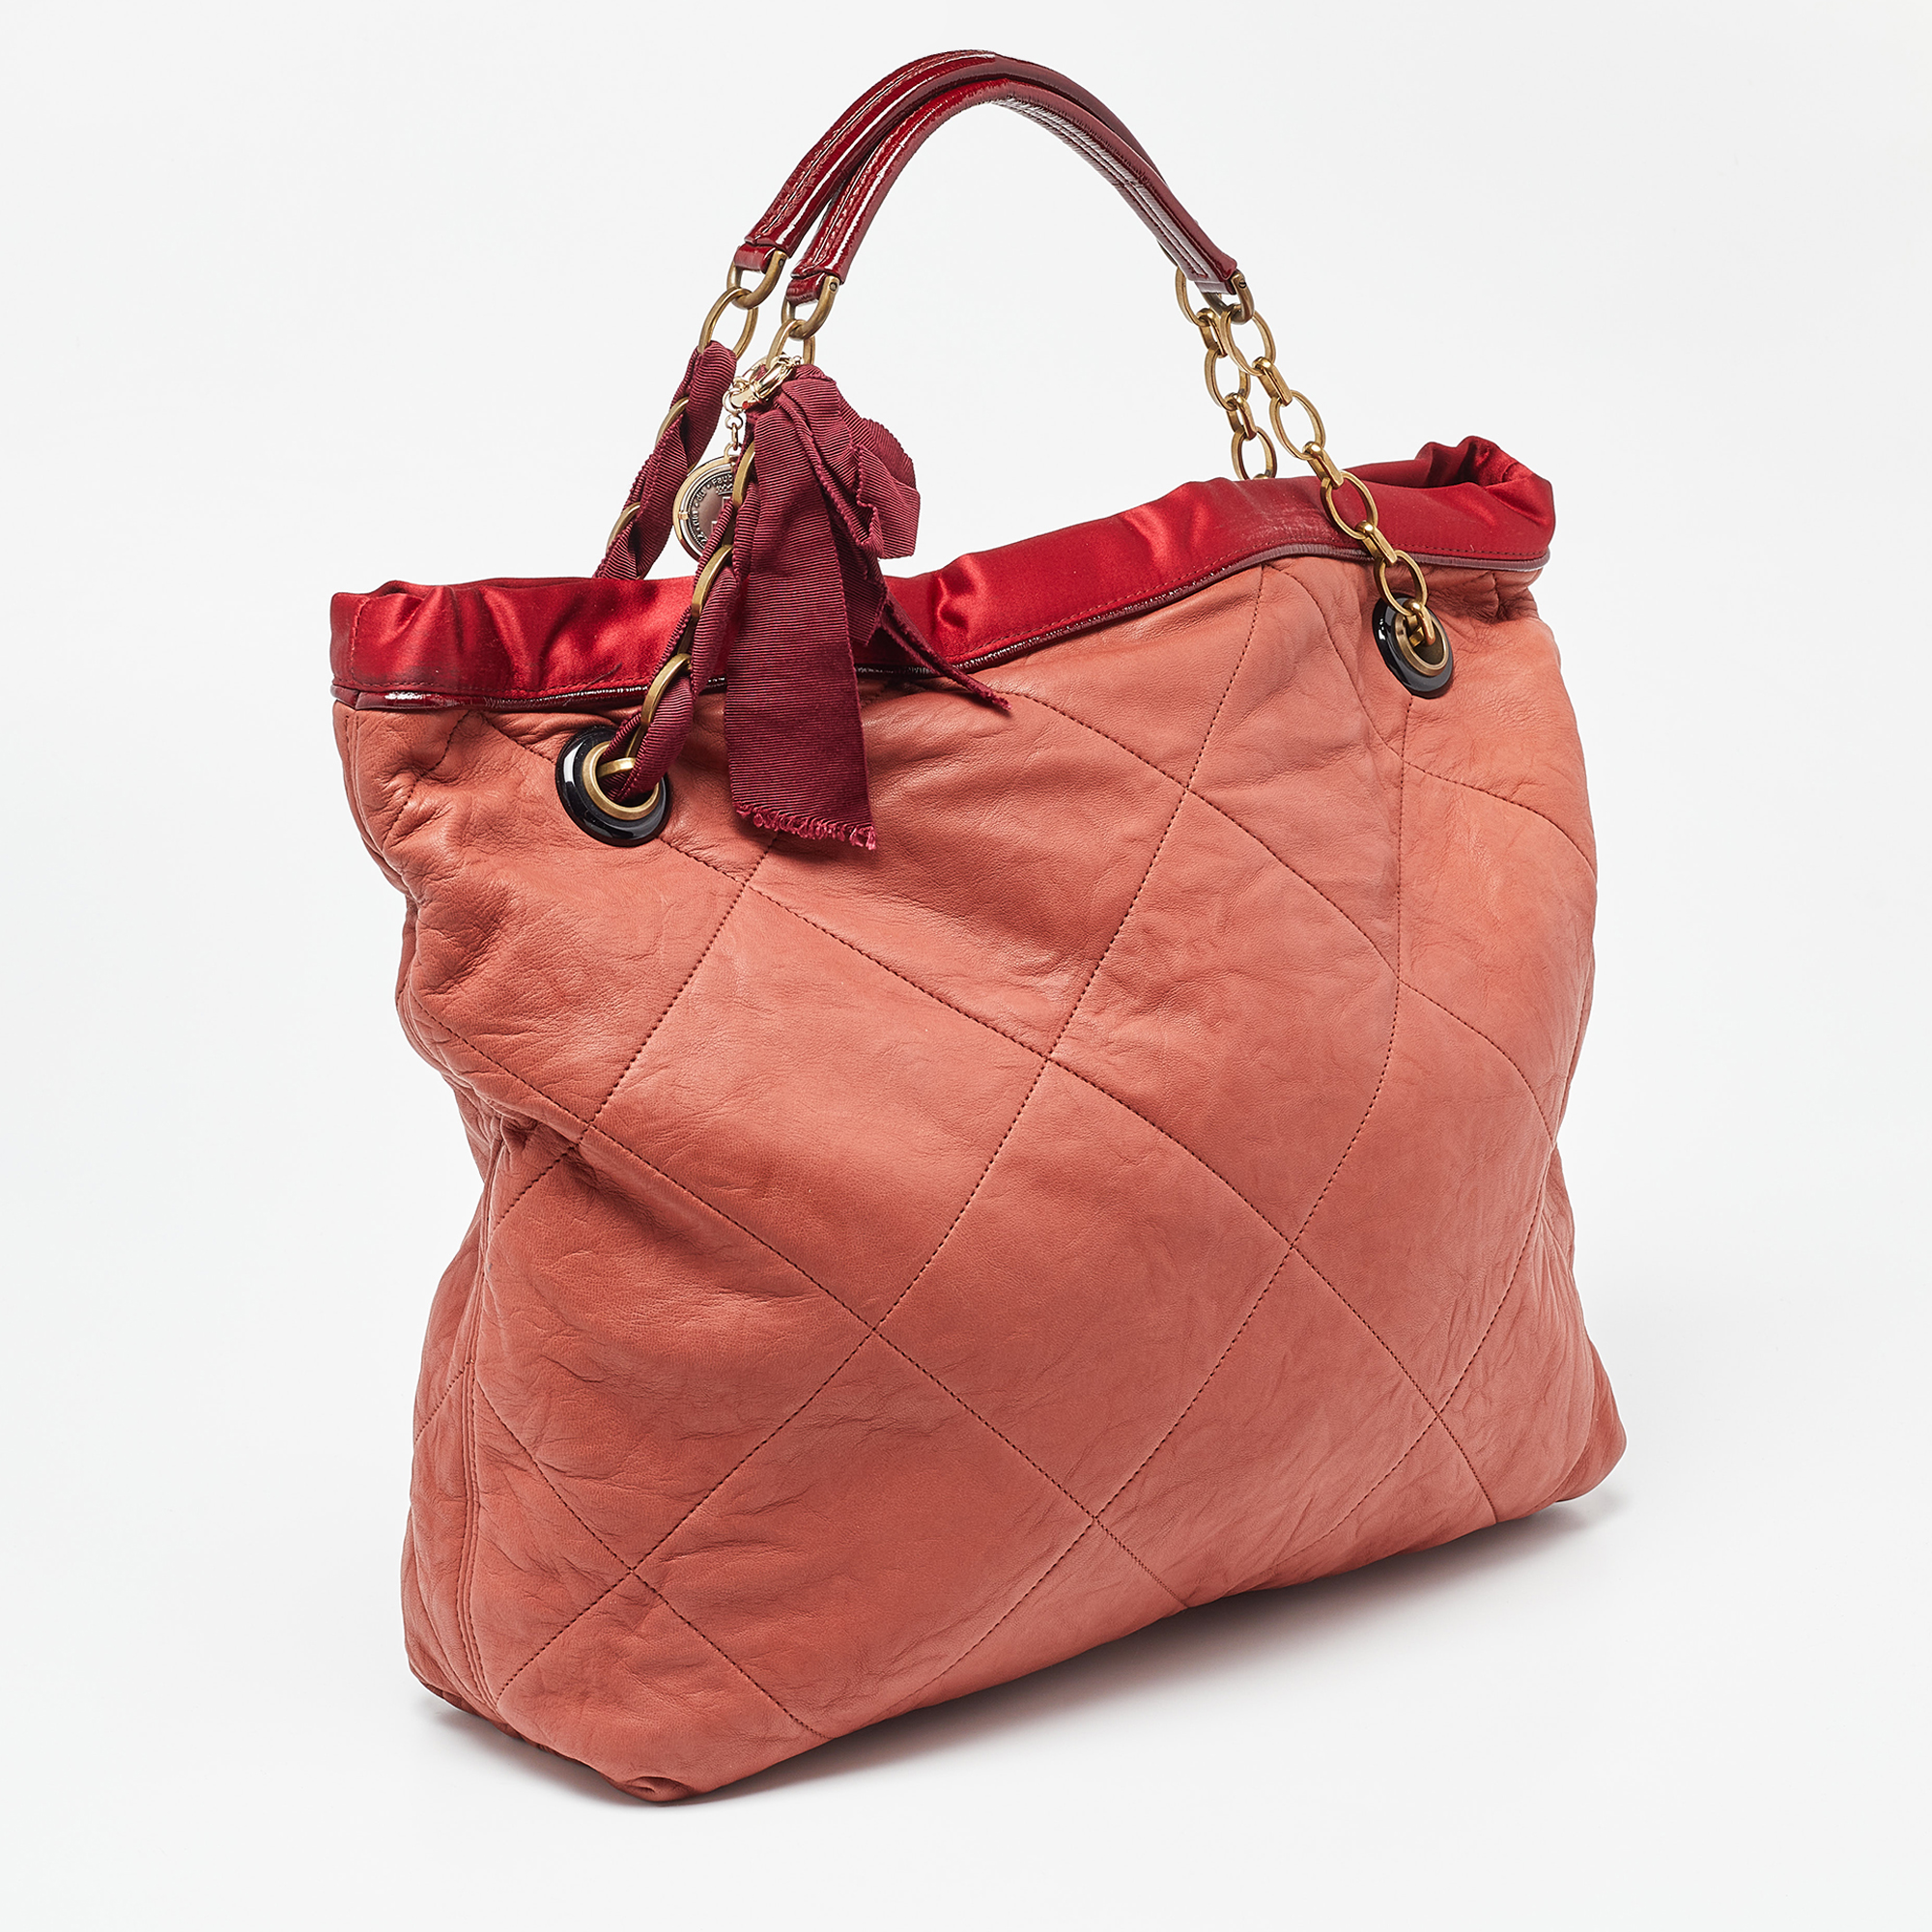 Lanvin Rust/Red Leather/Satin And Patent Leather Amalia Cabas Tote